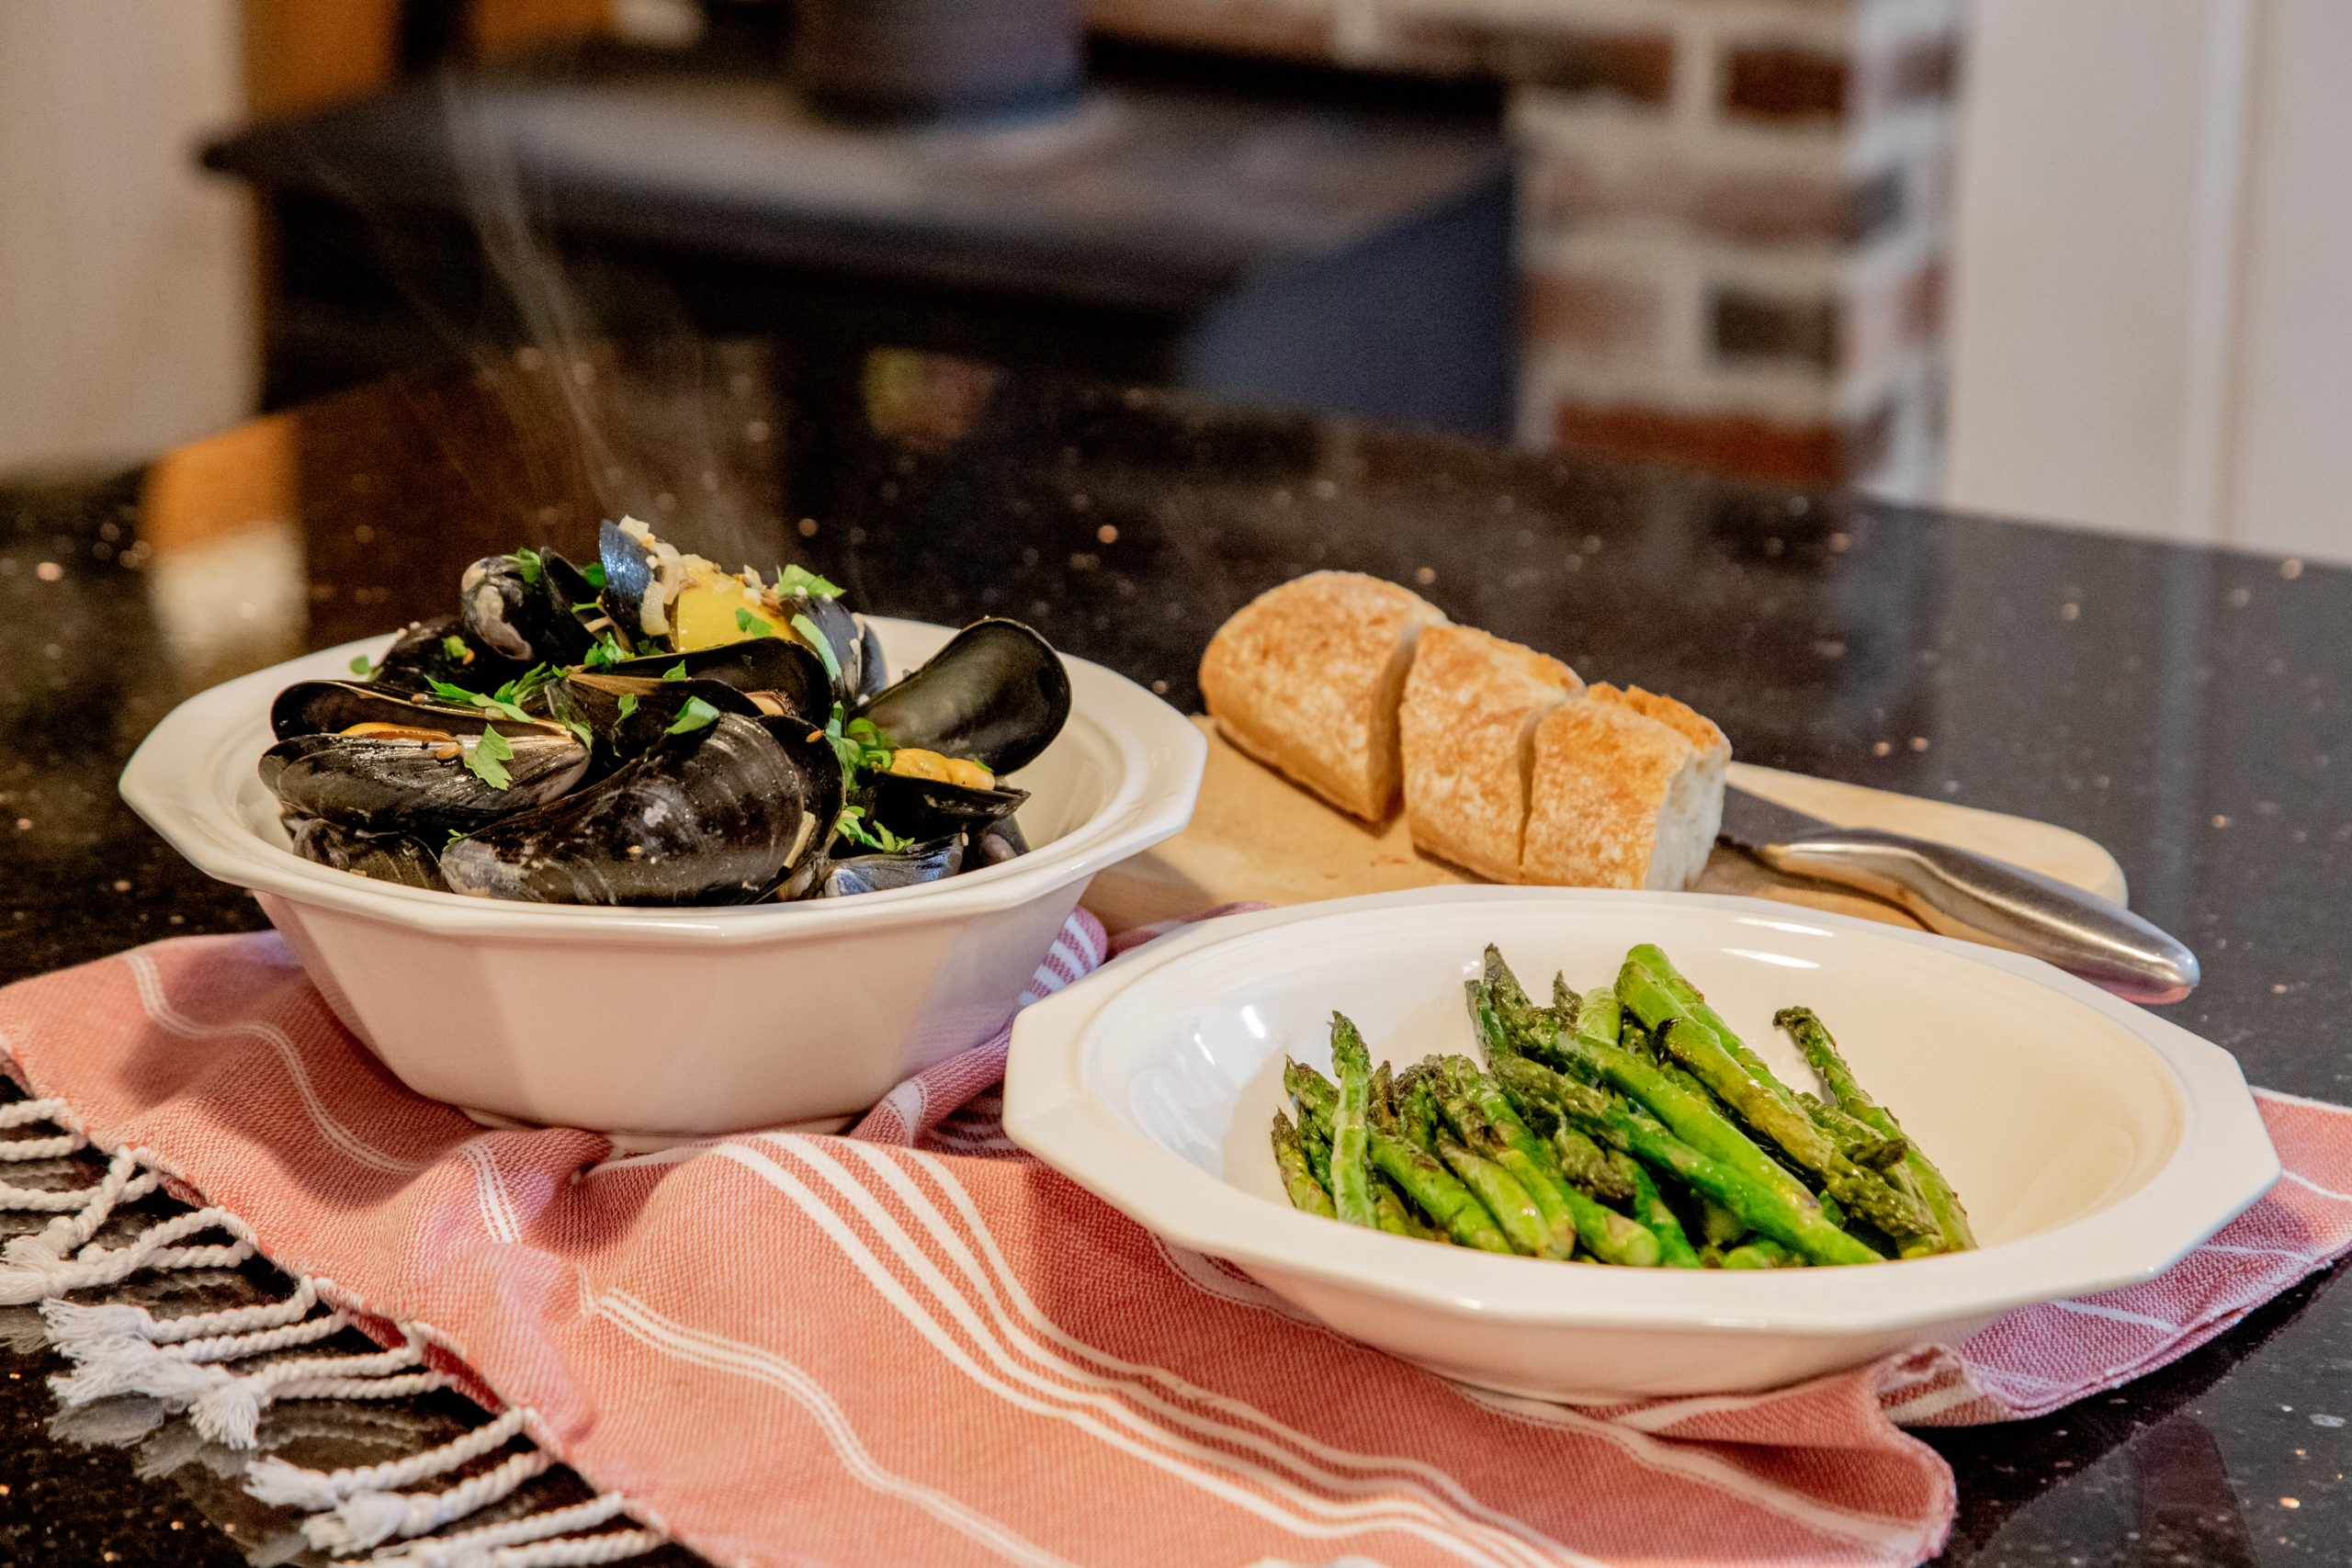 Mussels with asparagus and french bread.